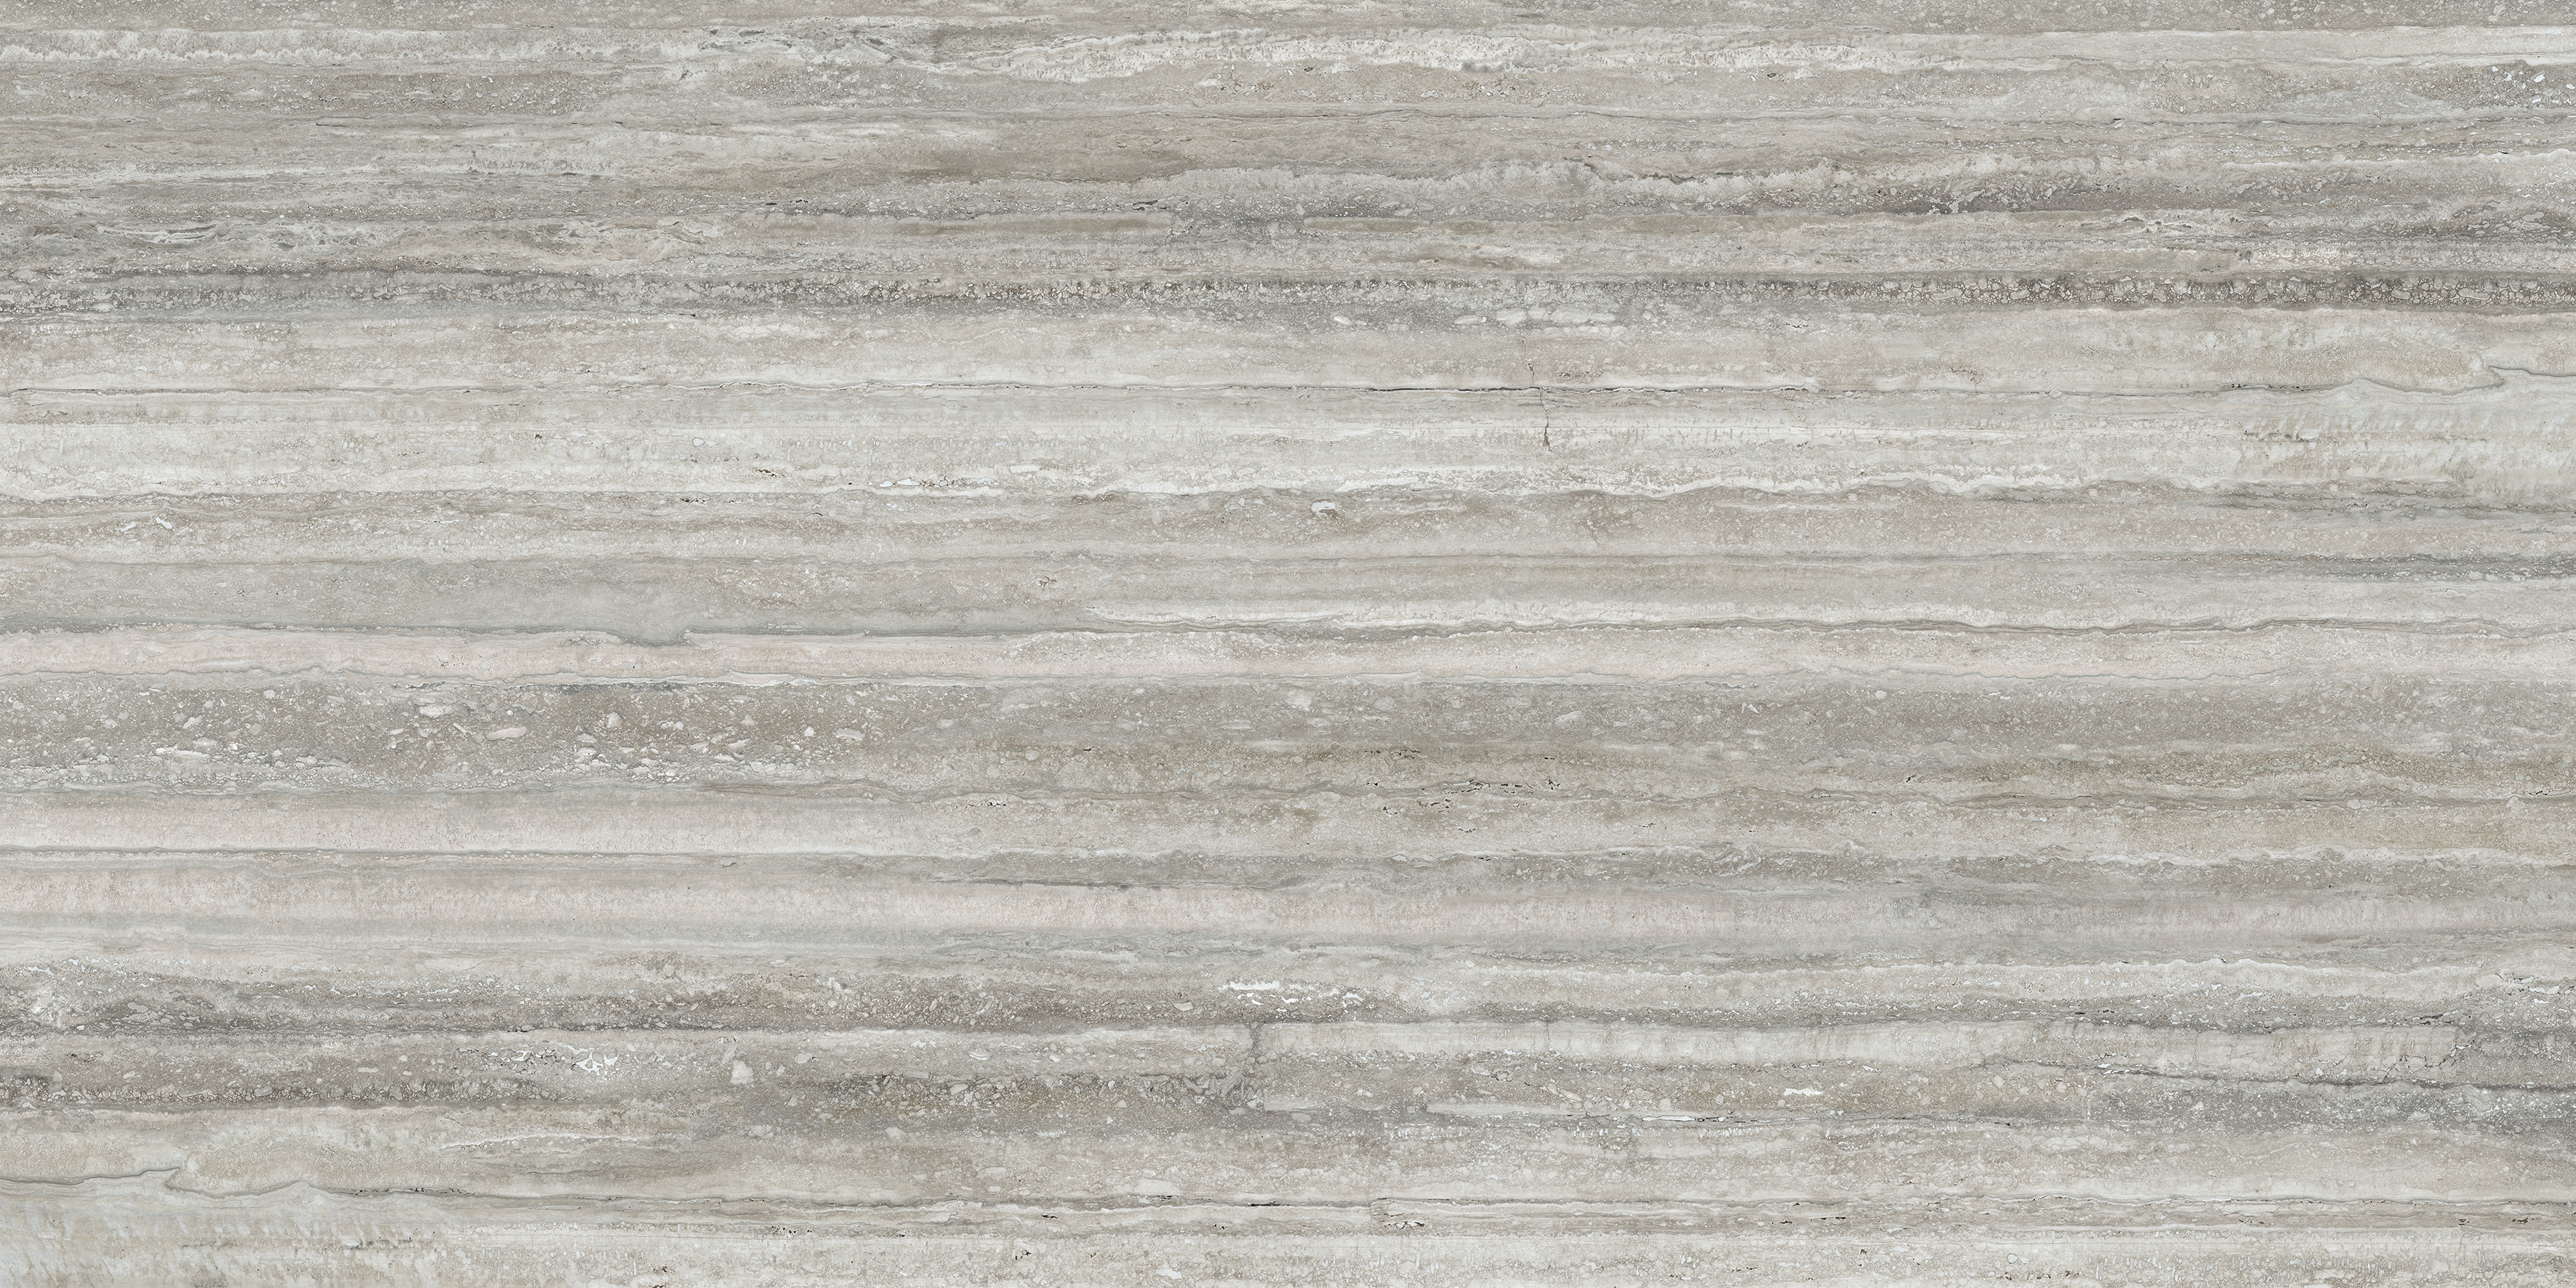 travertino instrata pattern glazed porcelain field tile from la marca anatolia collection distributed by surface group international honed finish rectified edge 24x48 rectangle shape